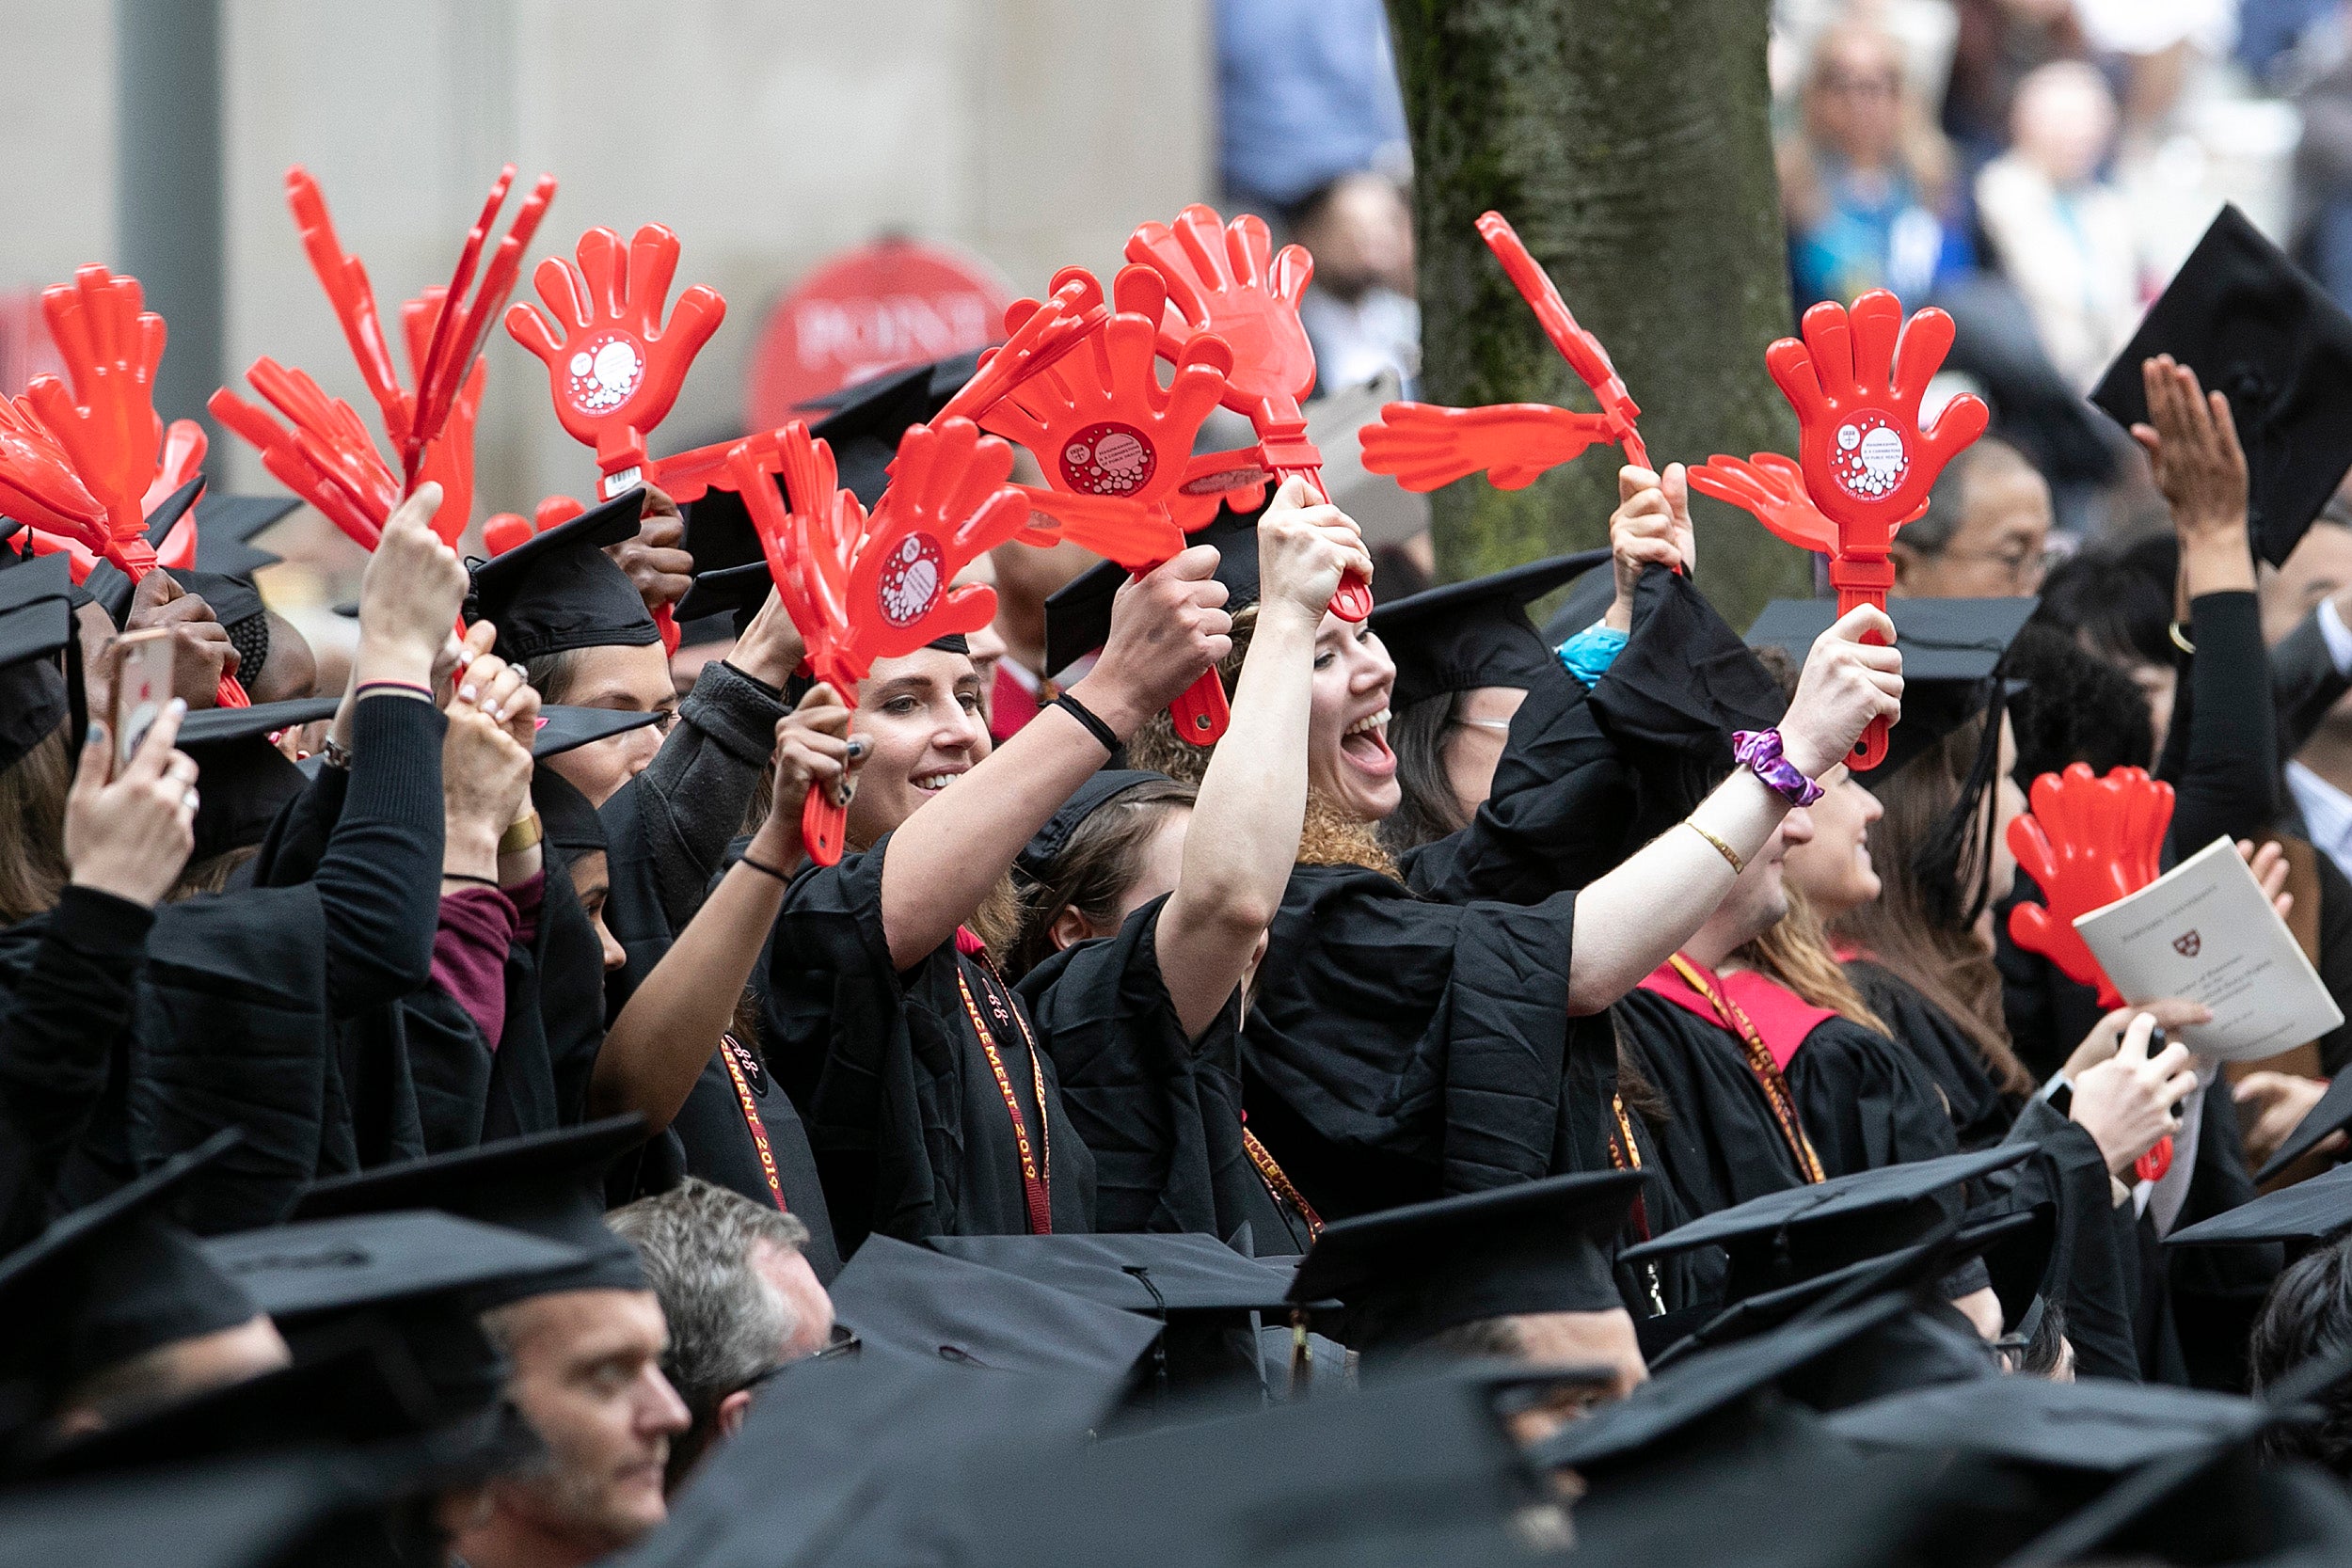 Harvard T.H. Chan School of Public Health graduates wave with red plastic clappers